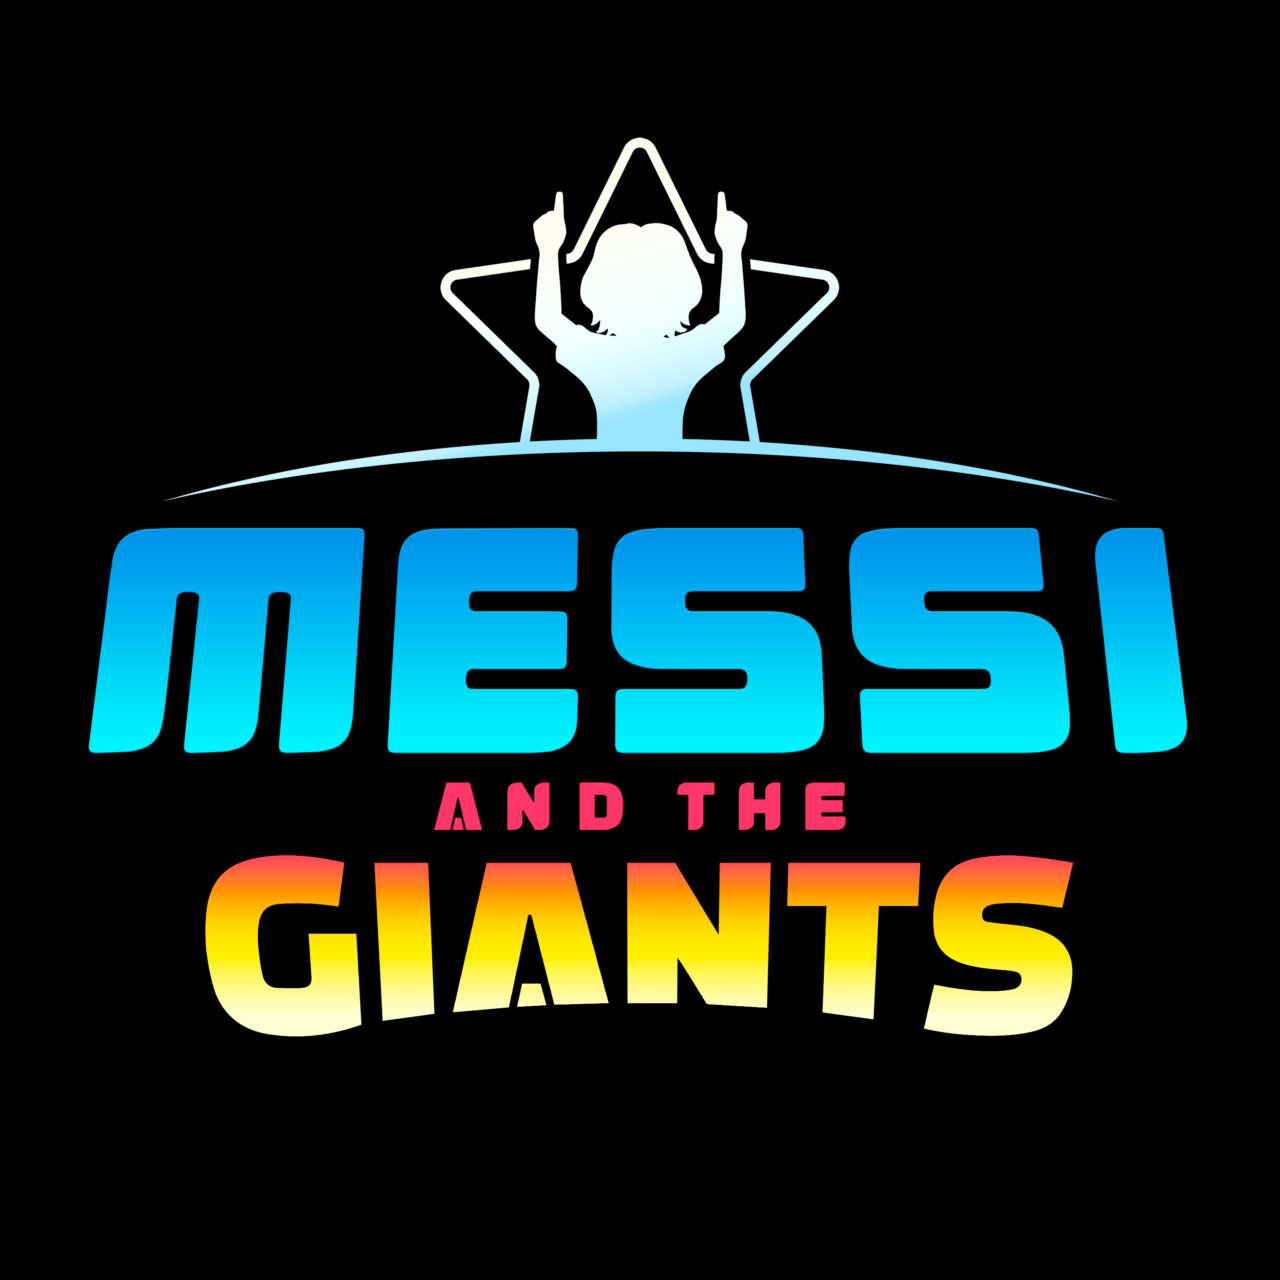 Messi And The Giants title treatment (Sony Pictures Entertainment)